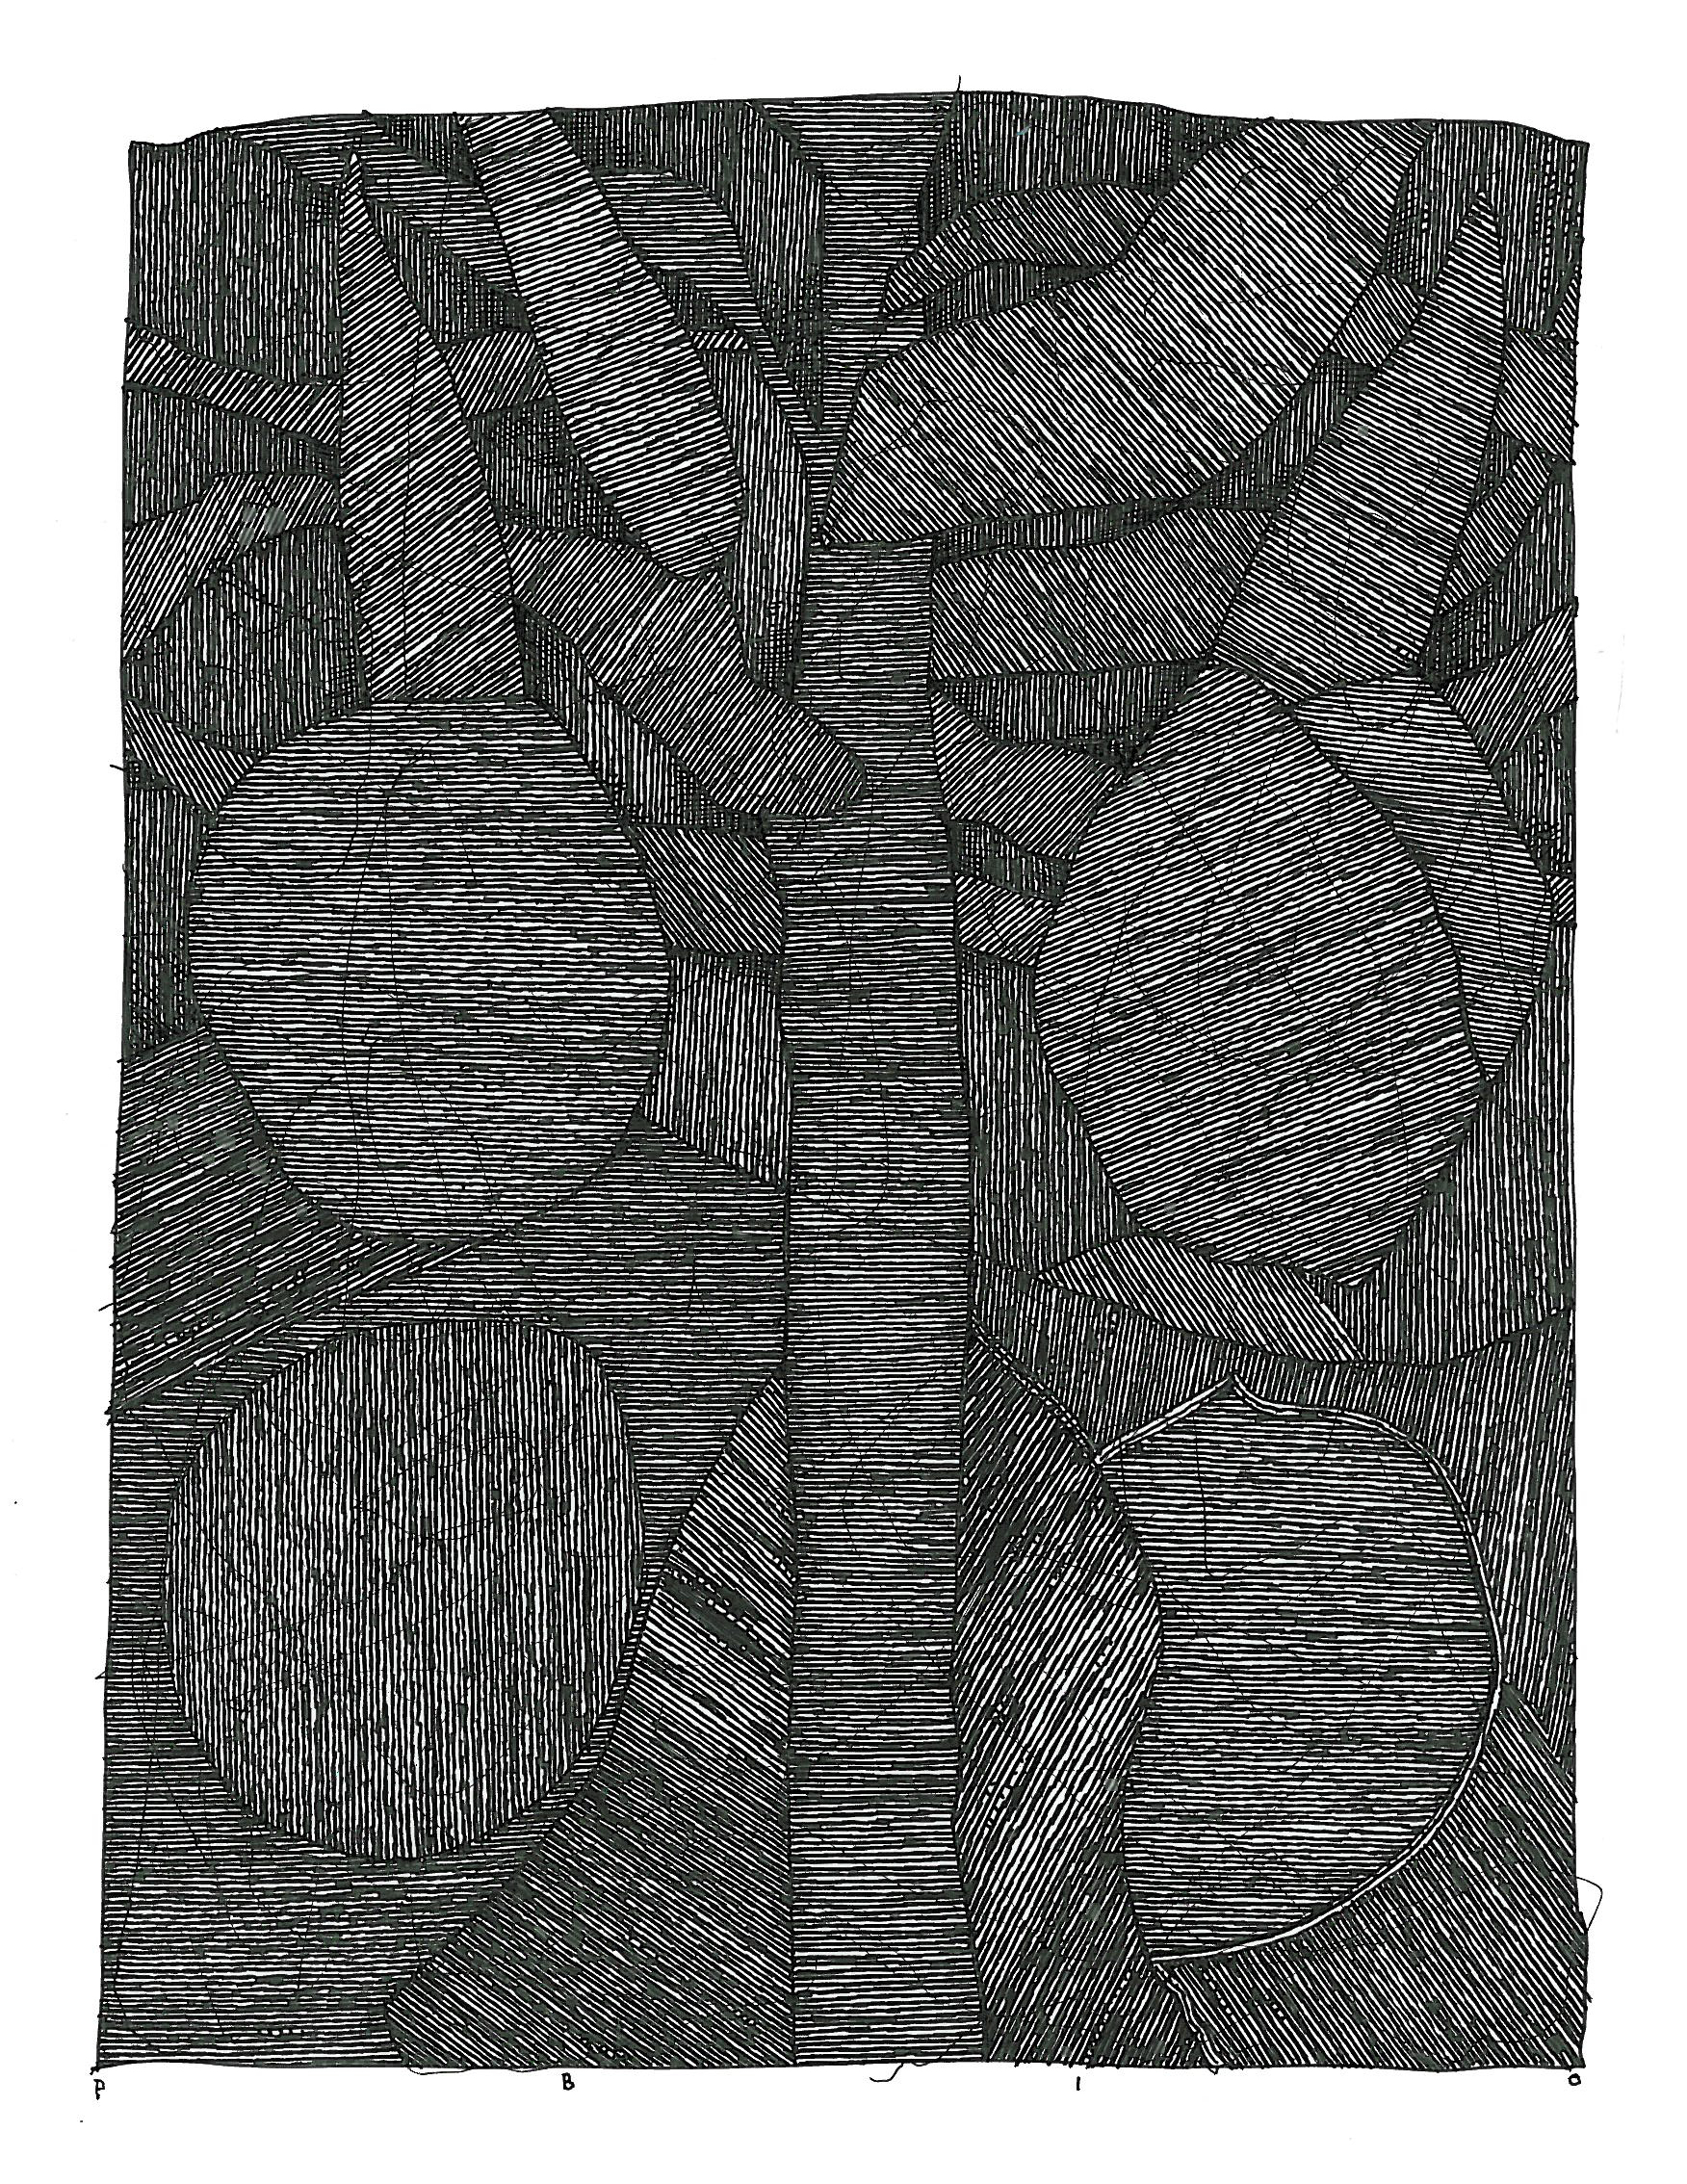  Pen and Ink - 5" x 7" - 2010 